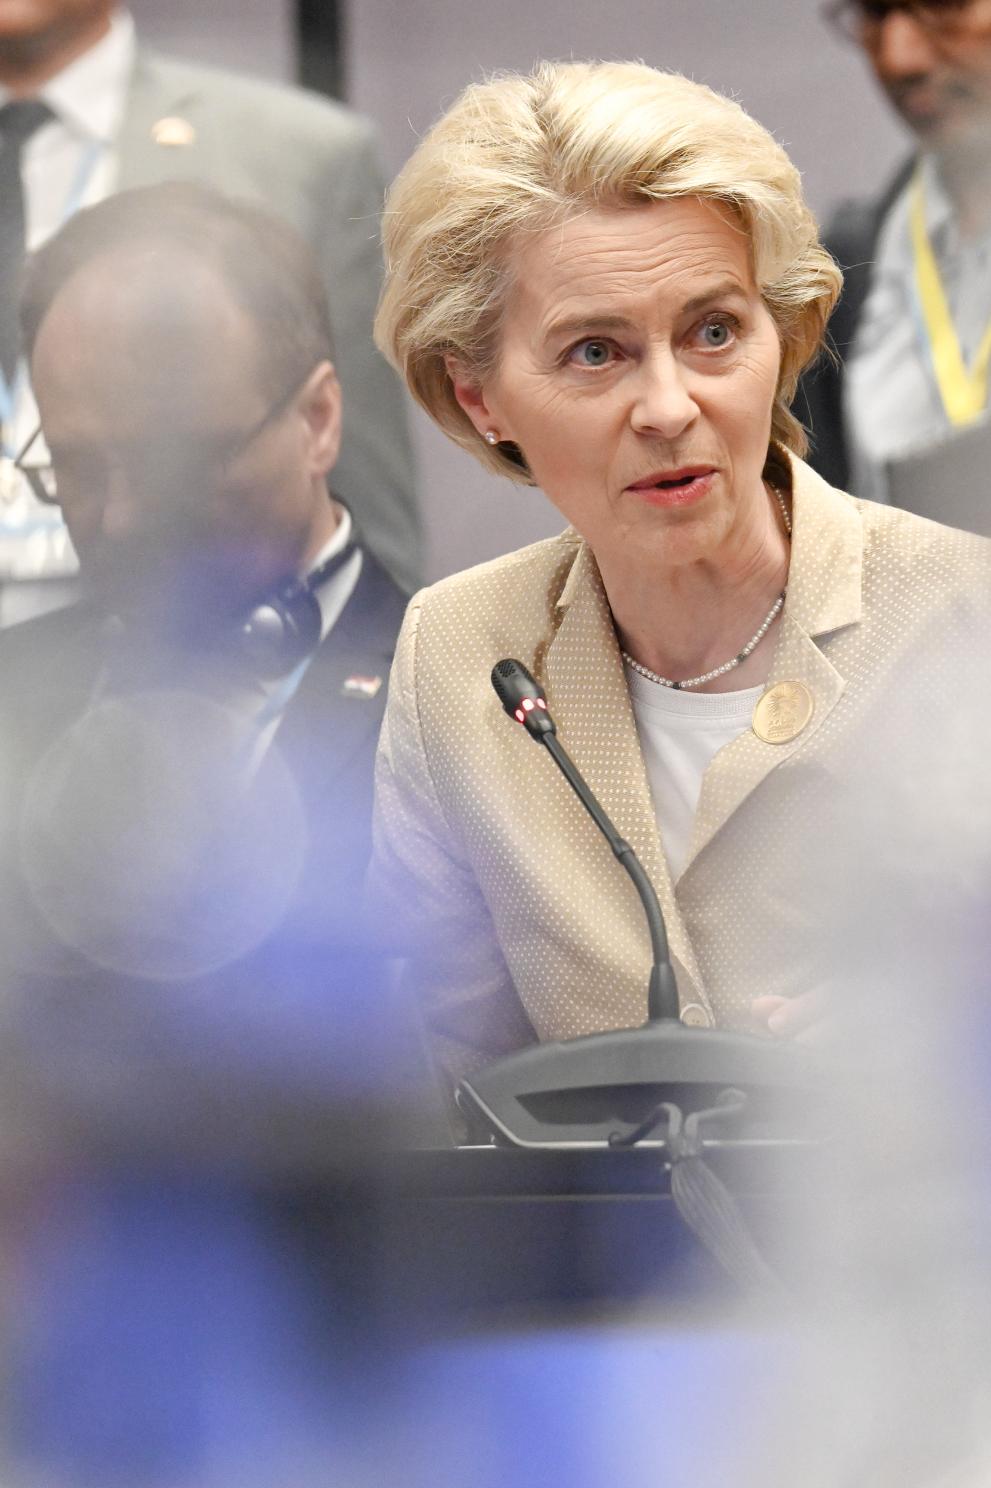 Participation of Ursula von der Leyen, President of the European Comission, in the the UN Climate Conference (COP27) in Egypt